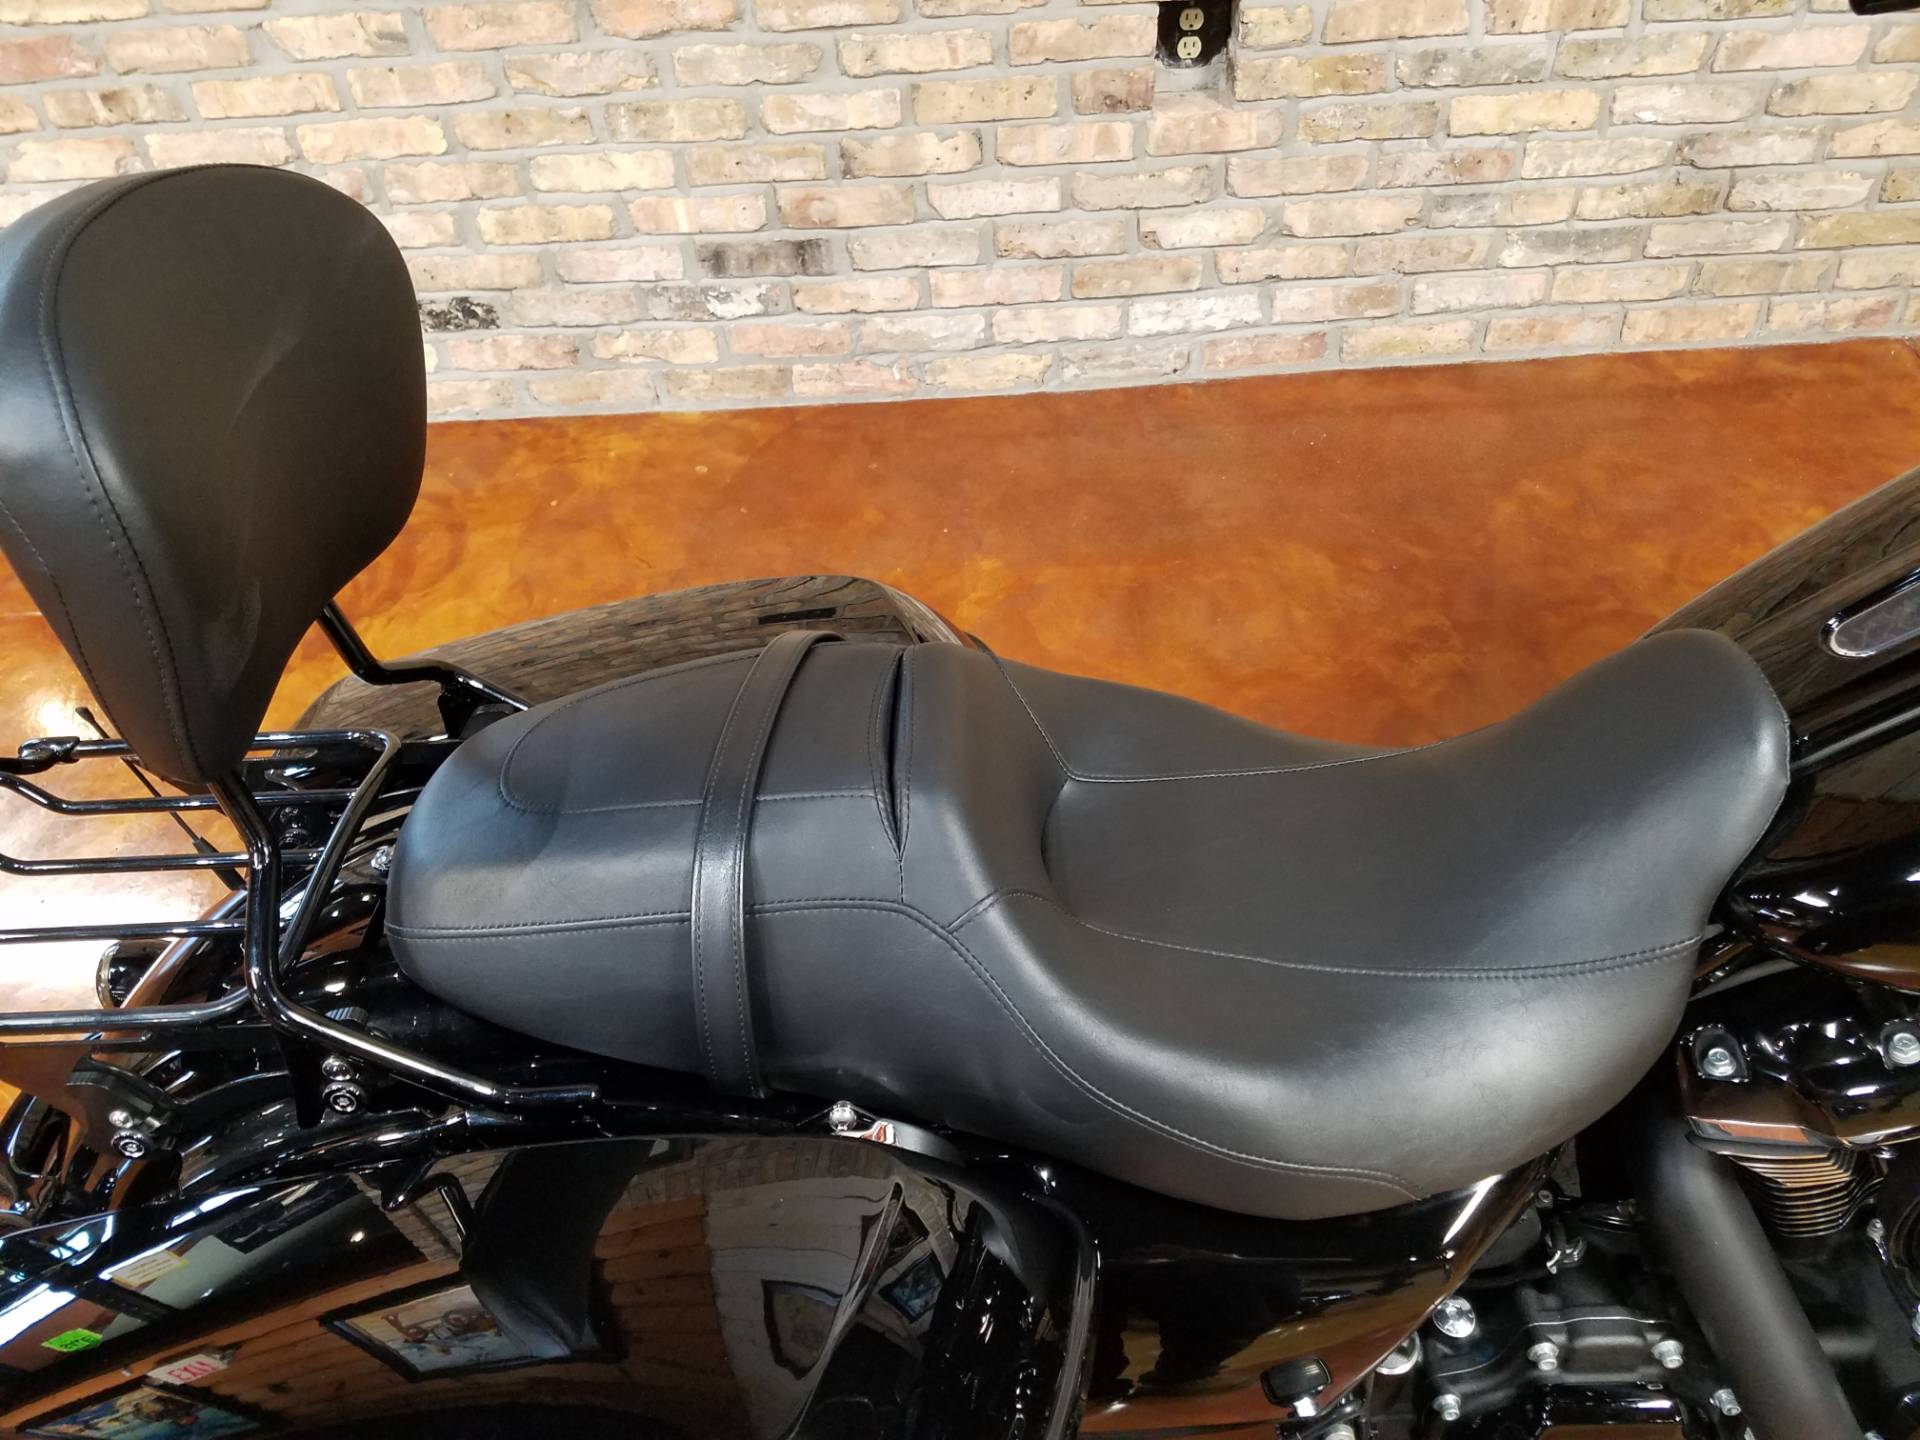 2019 Harley-Davidson Road Glide® Special in Big Bend, Wisconsin - Photo 21